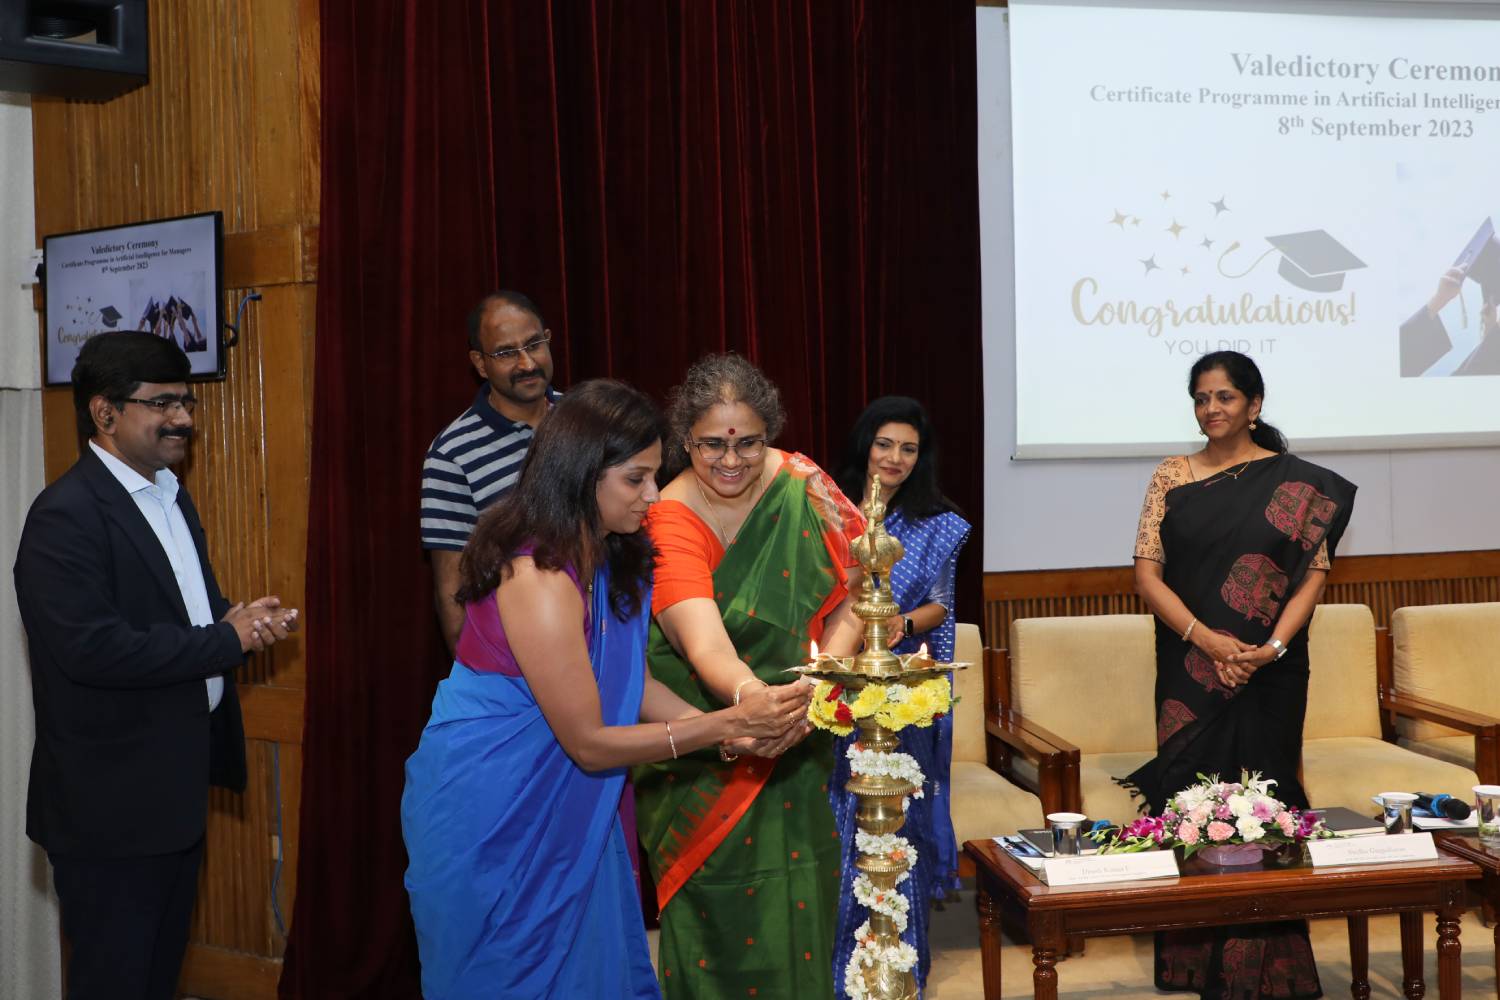 A participant of the progamme, ‘Artificial Intelligence for Managers’, and Prof. Vasanthi Srinivasan, Chairperson, Digital Learning and faculty in the OB&HRM area at IIMB, light the ceremonial lamp, at the valedictory ceremony of the programme, on 8th September 2023.